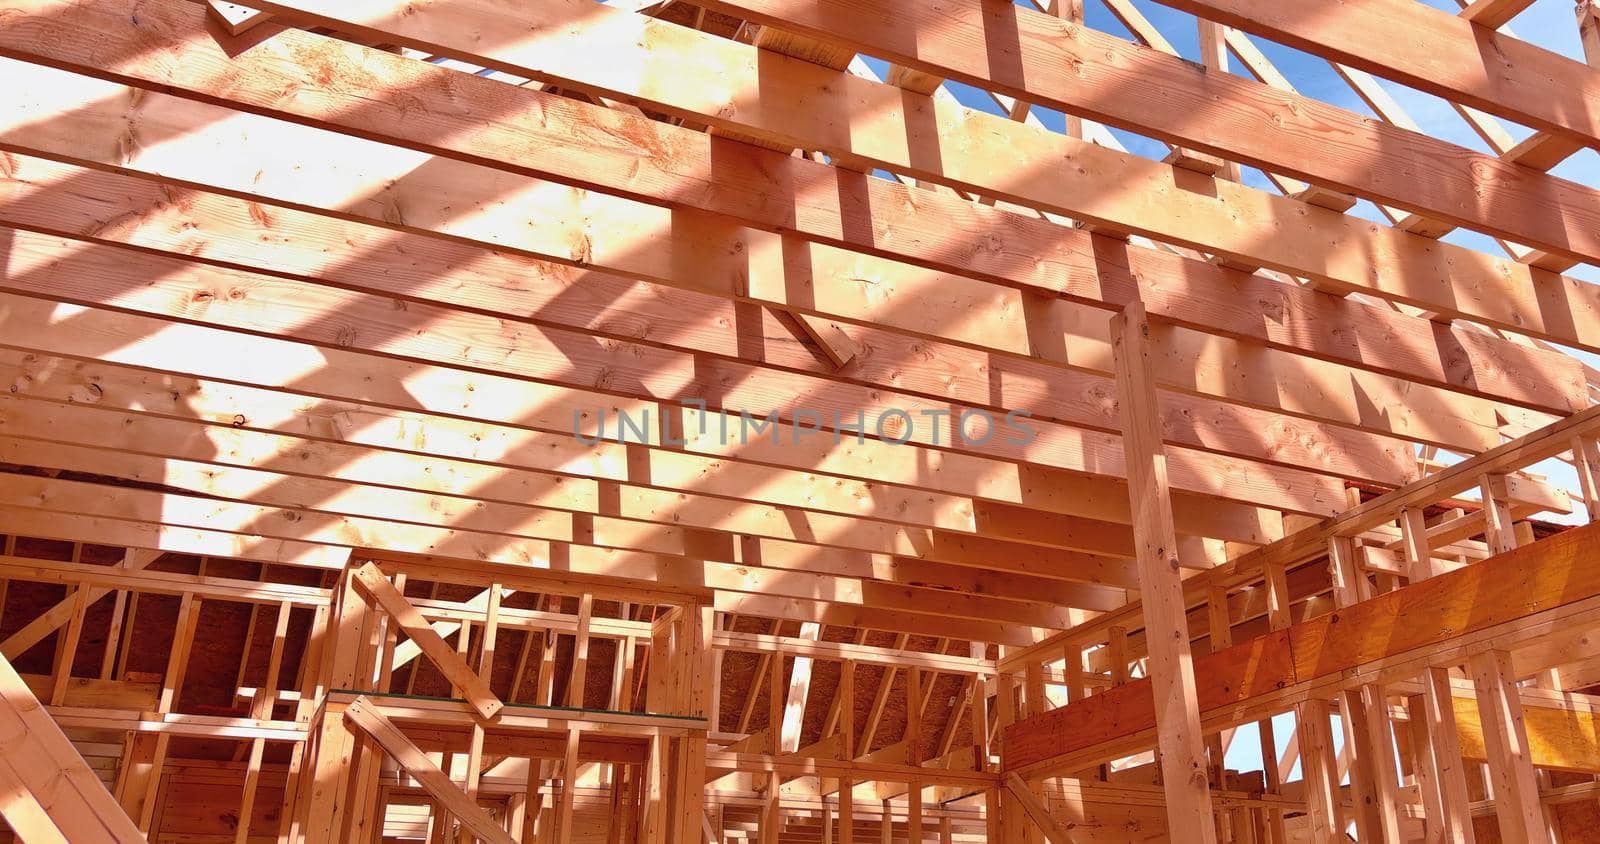 Installation of wooden with roof beams frame trusses condominium construction framework